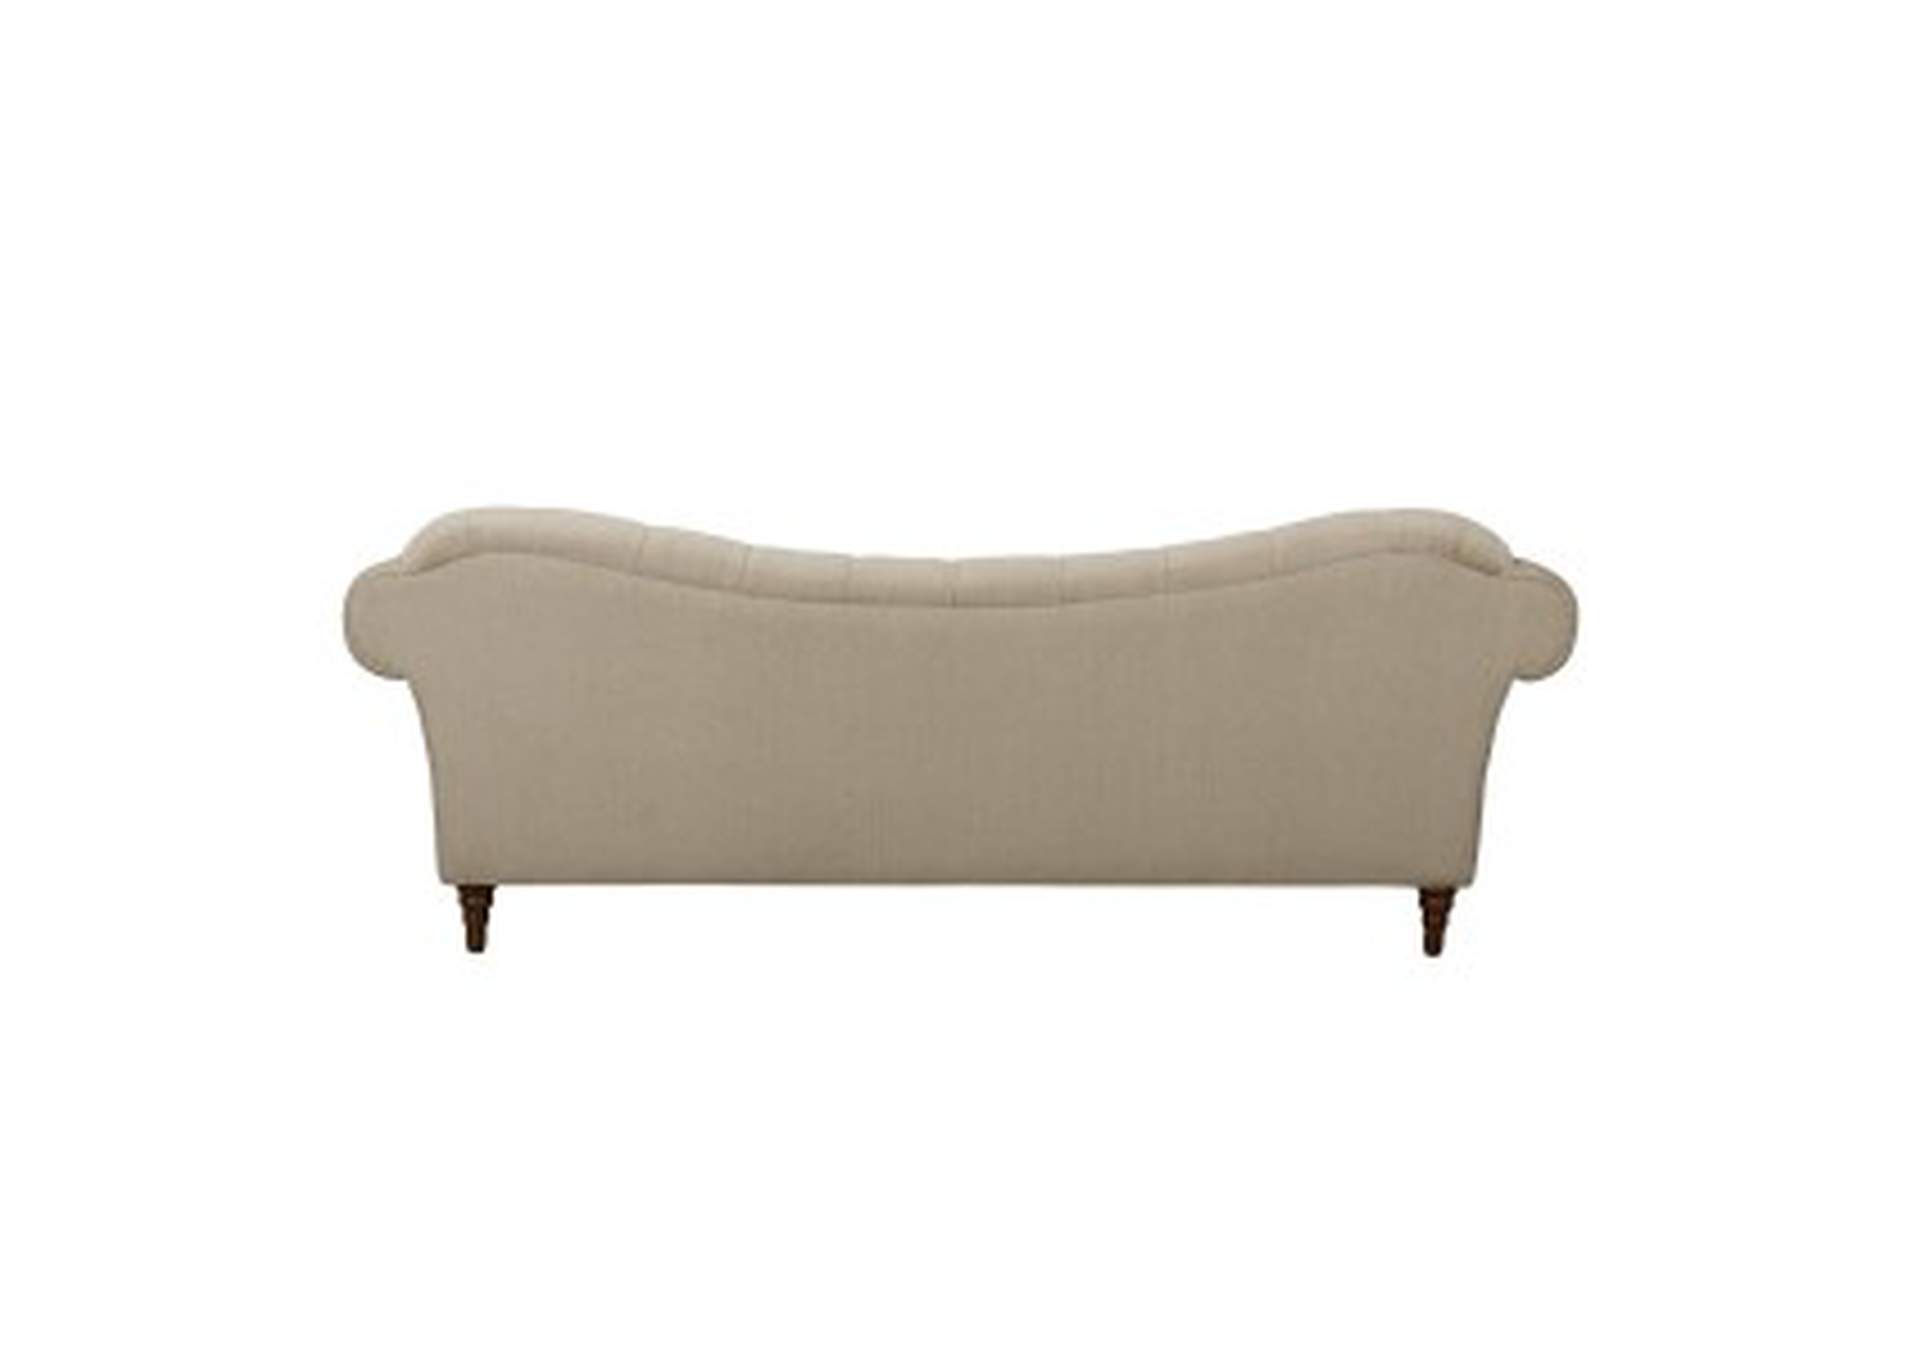 St. Claire Sofa,Homelegance